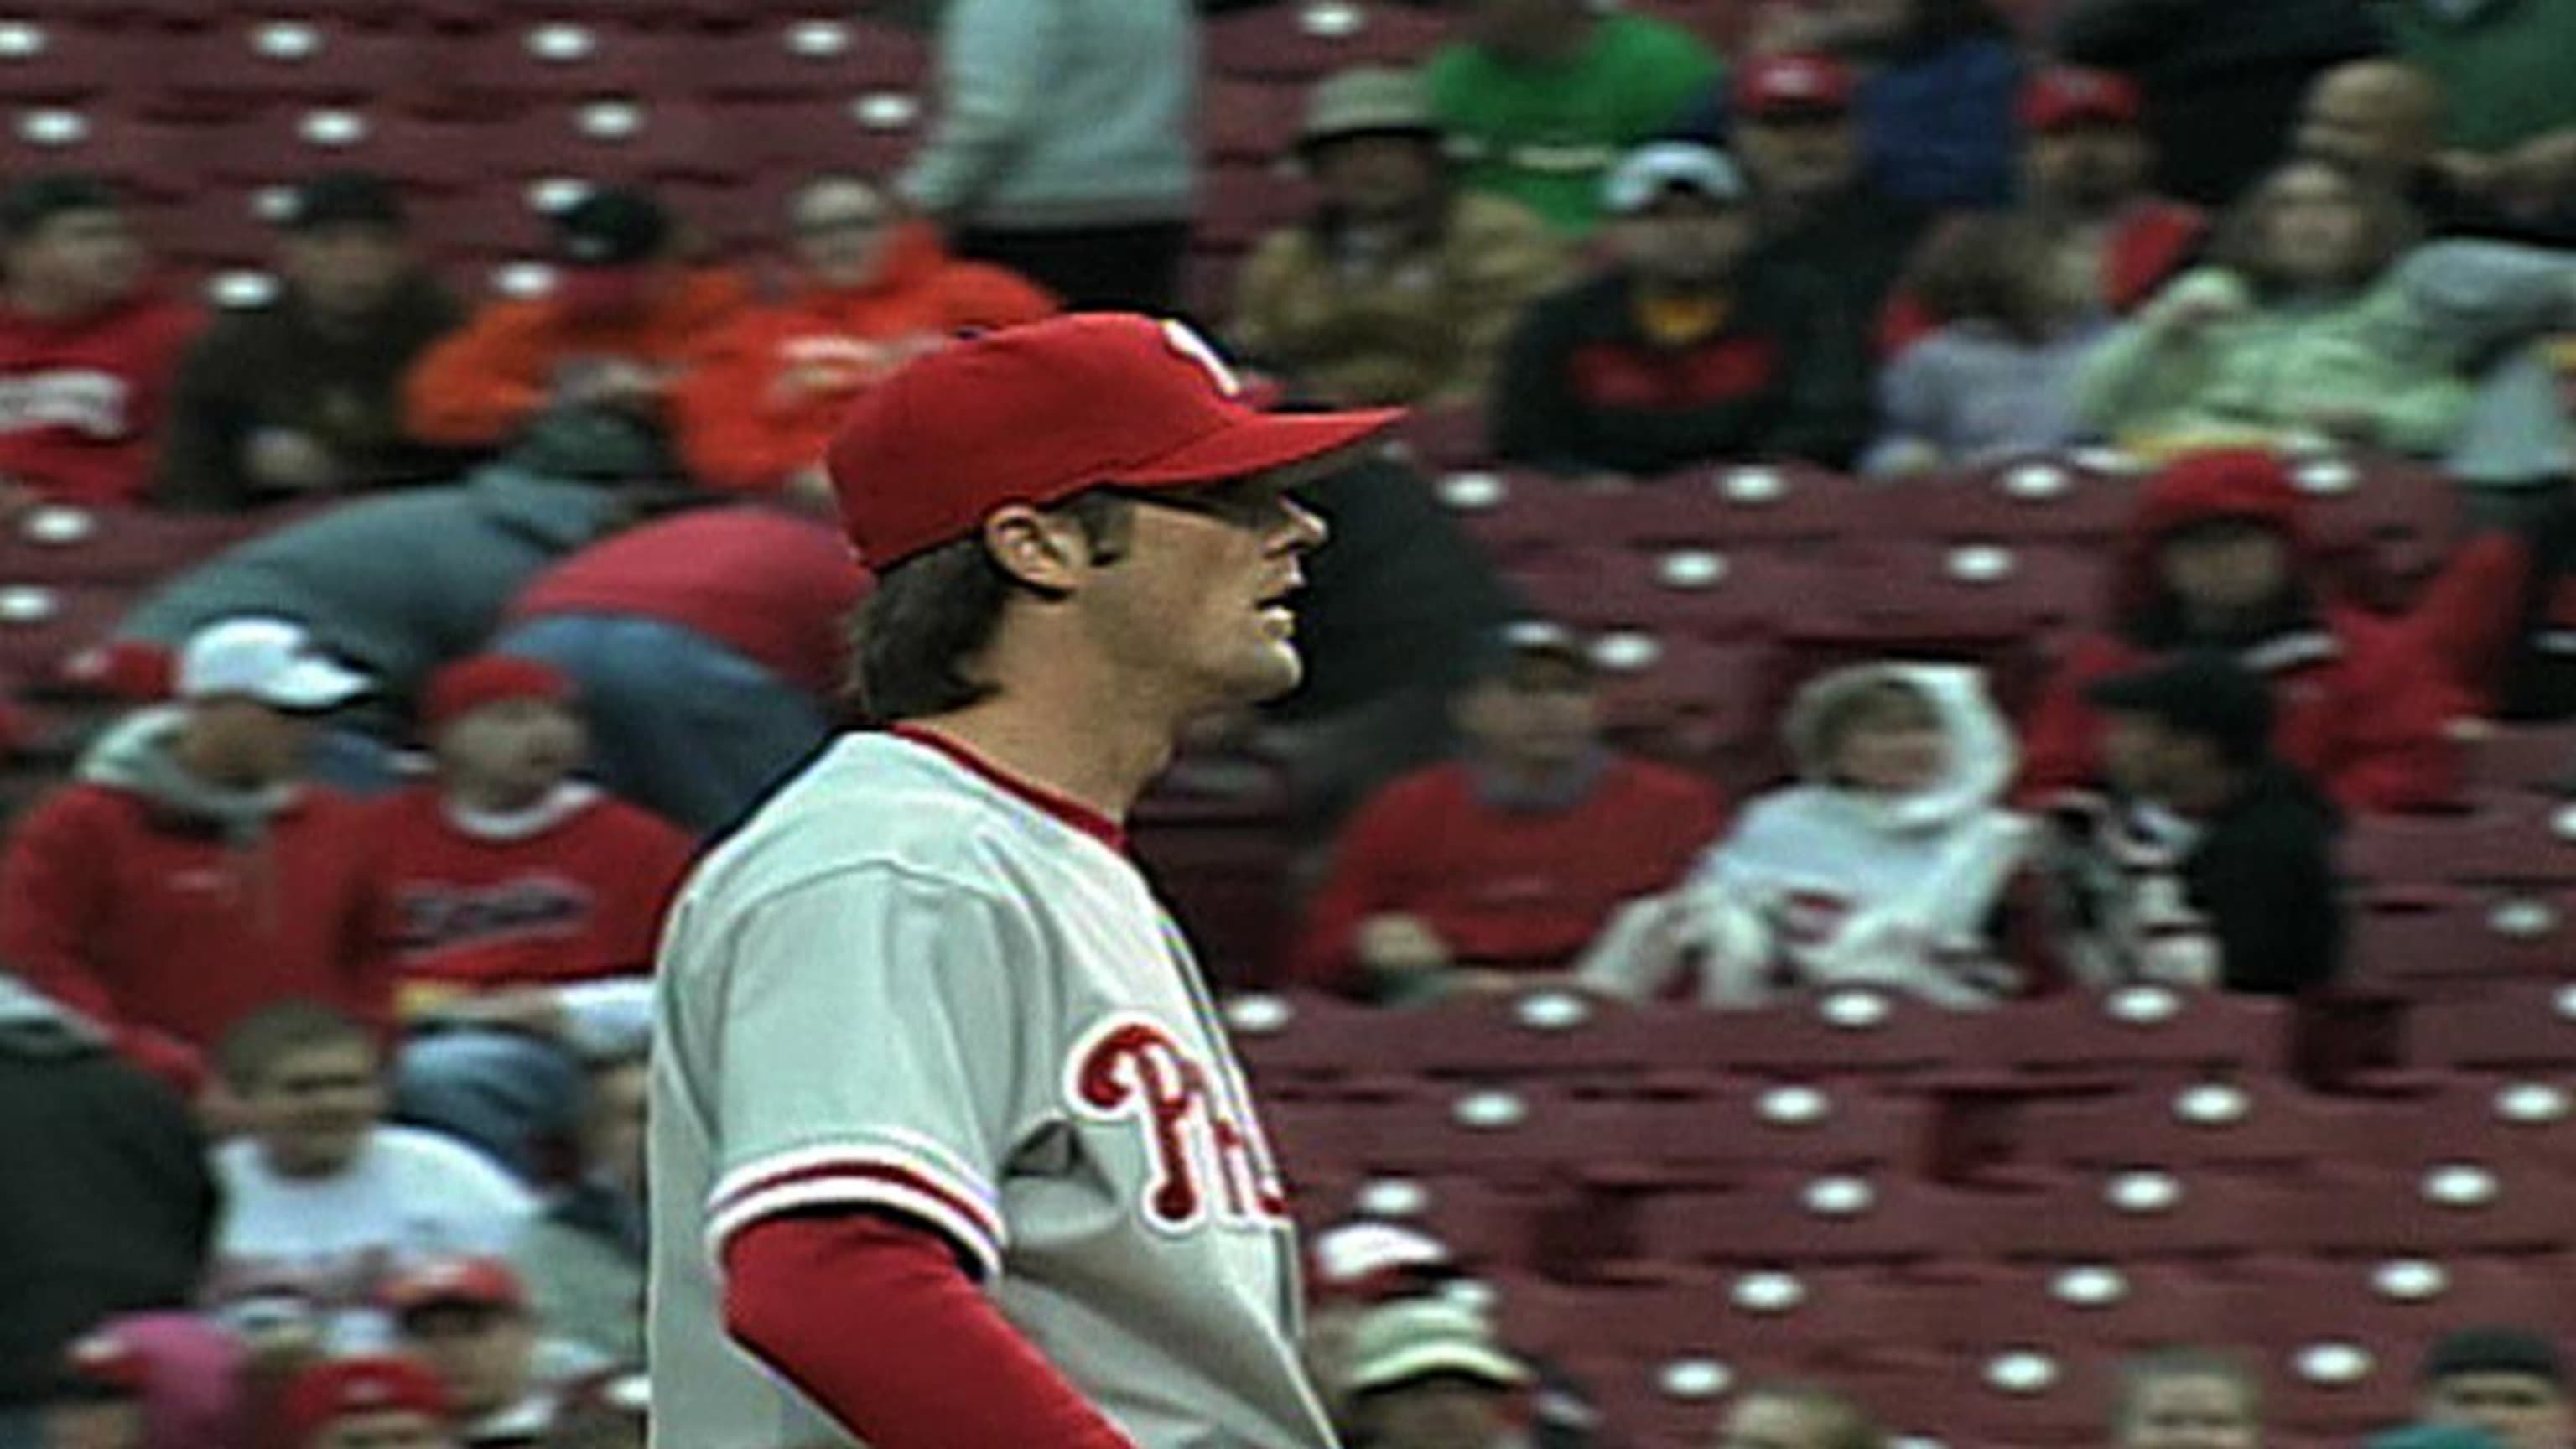 Phillies World Series MVP Cole Hamels officially retires